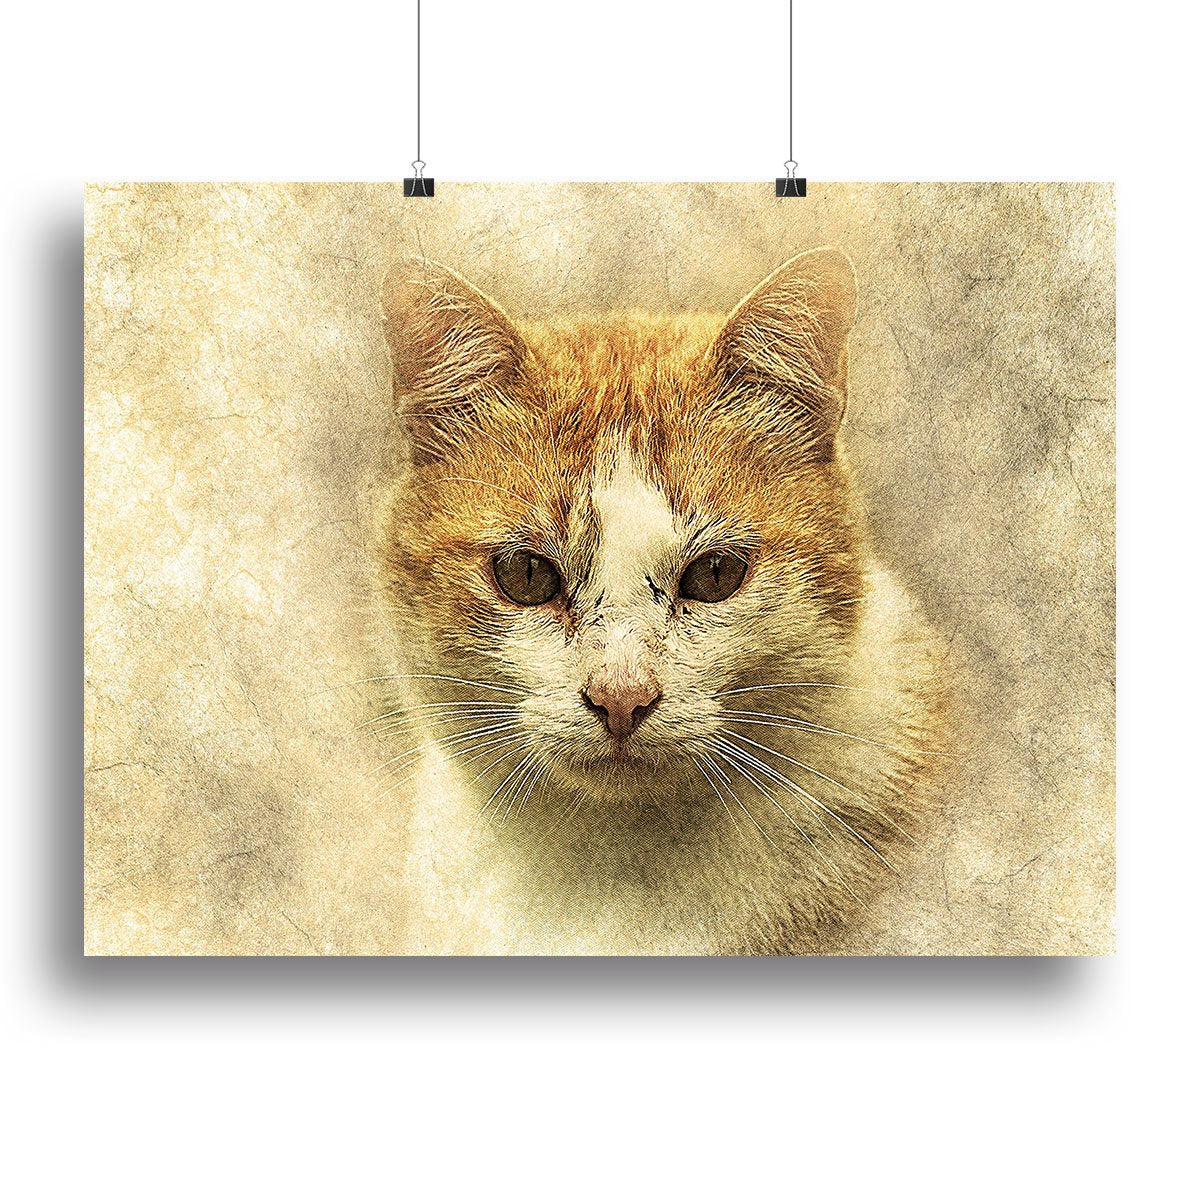 Ginger Cat Painting Canvas Print or Poster